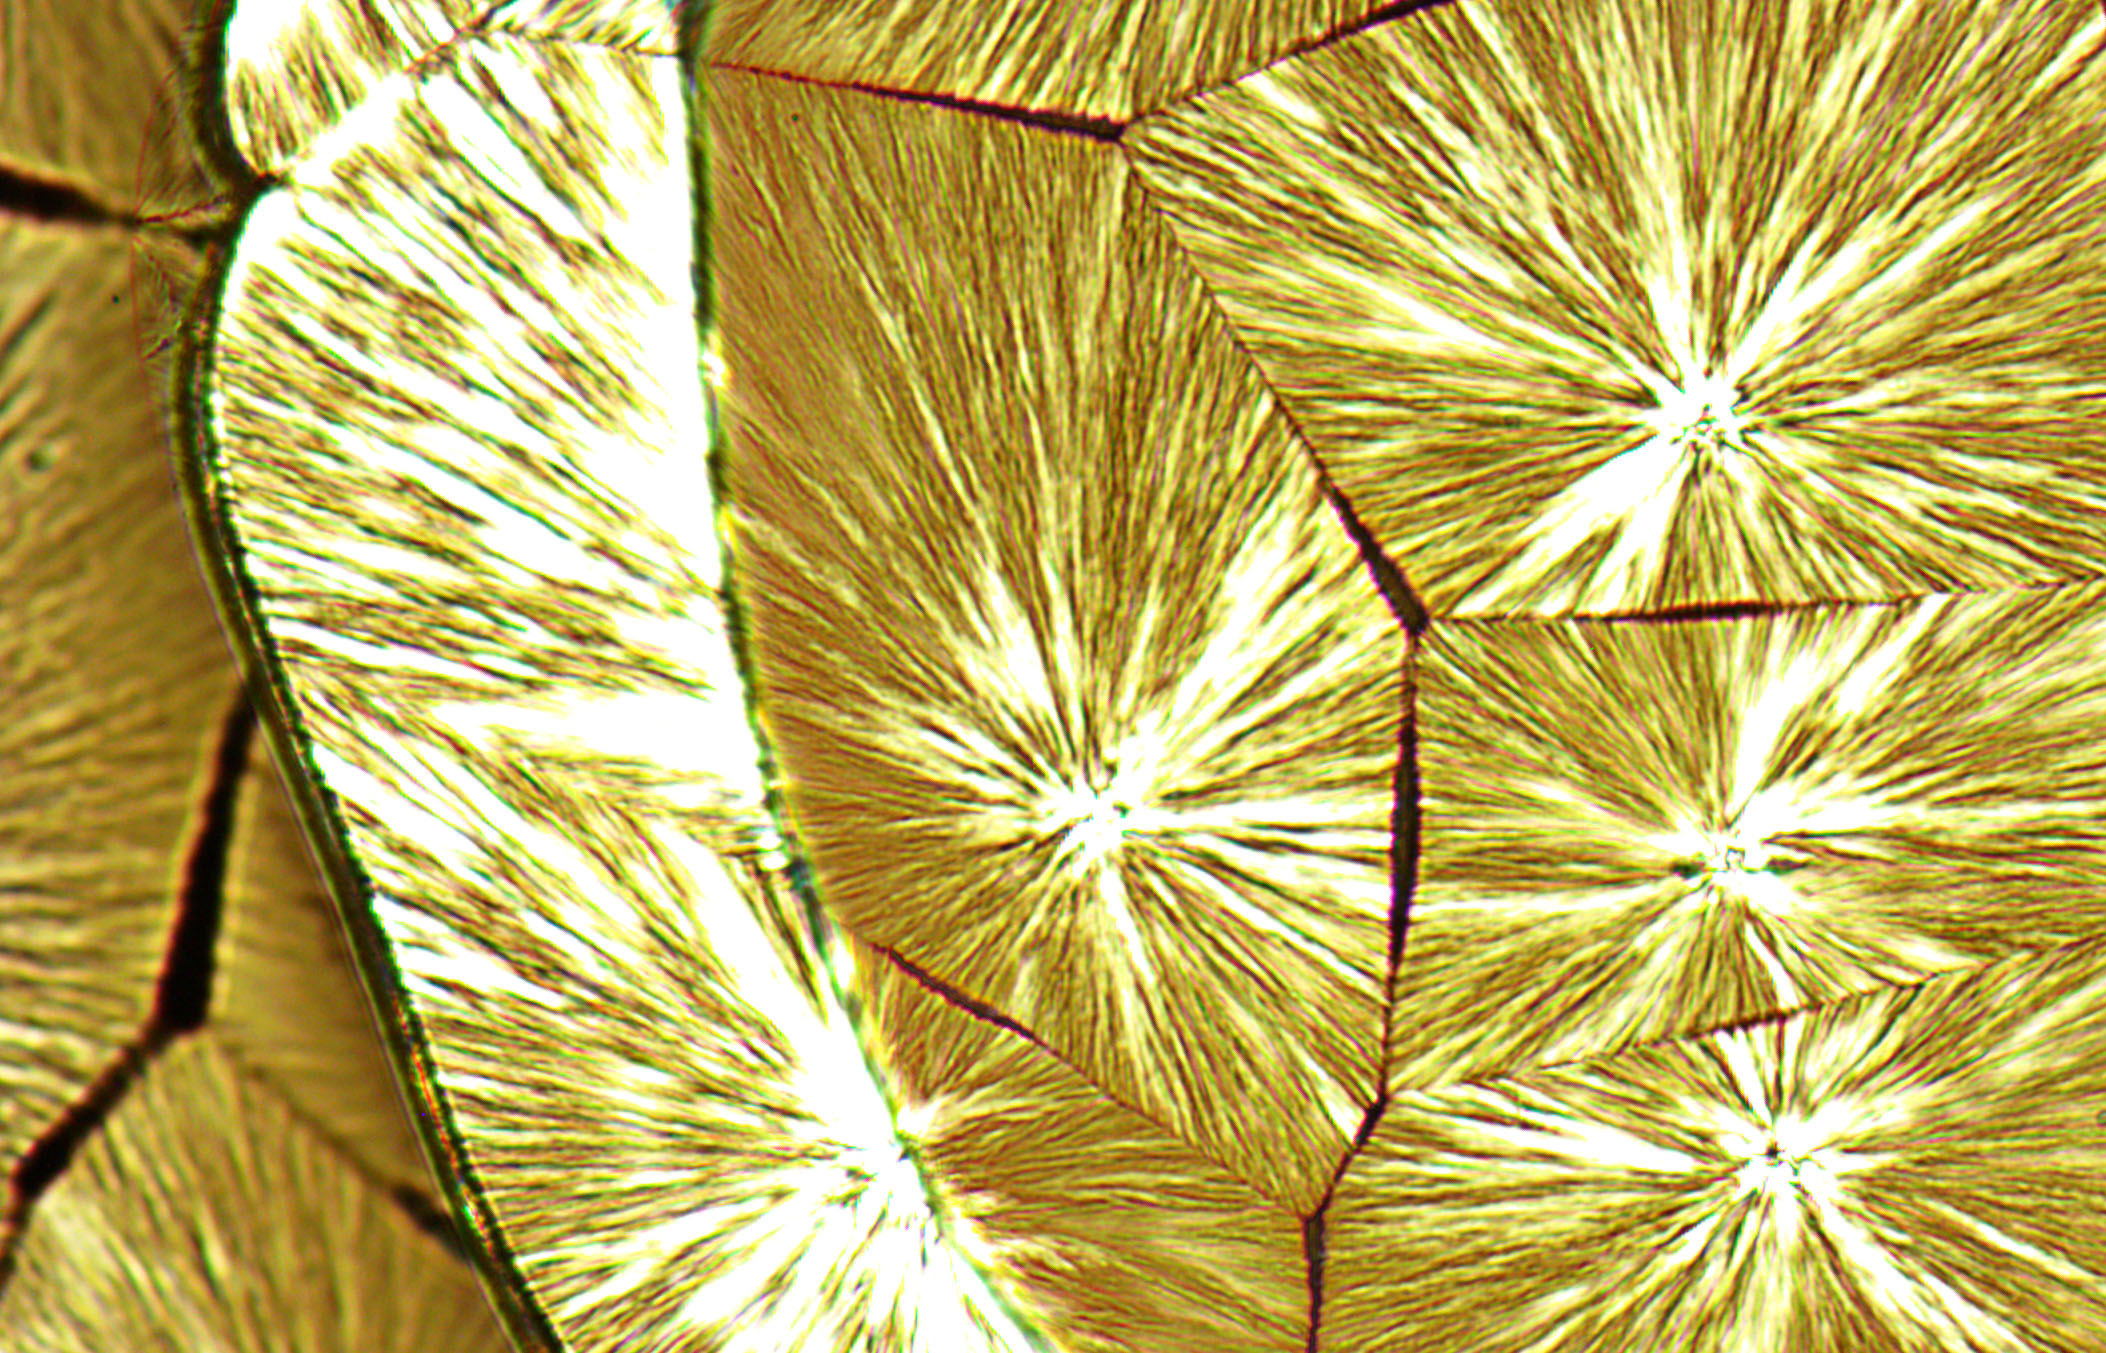 Microscopic crystal growth with radiant patterns and geometric lines.